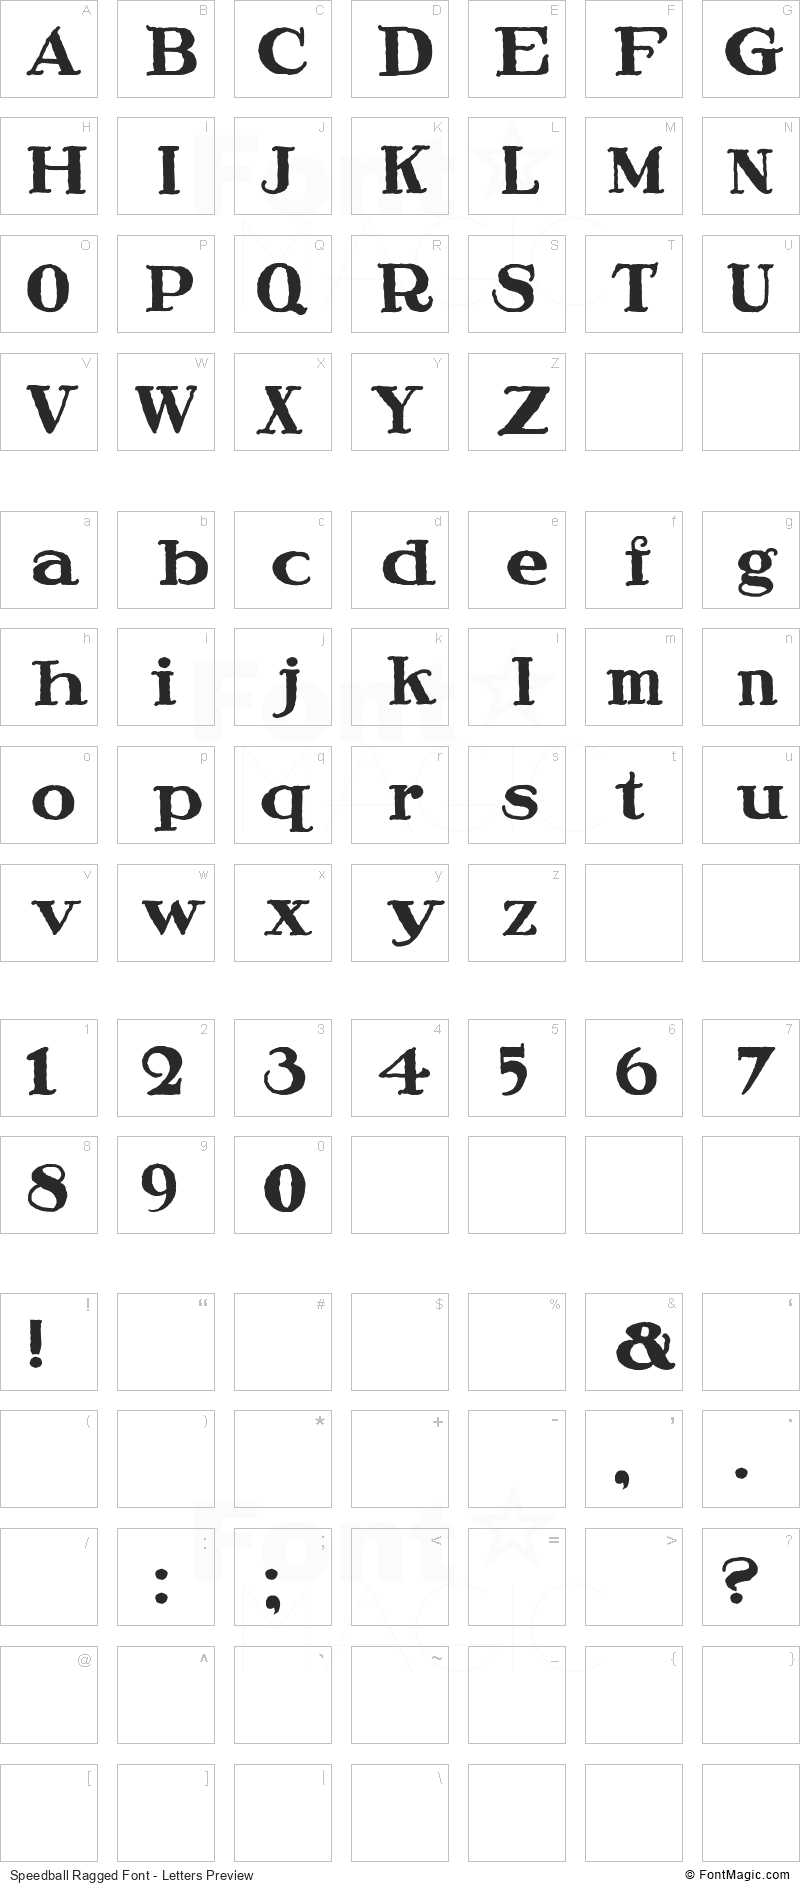 Speedball Ragged Font - All Latters Preview Chart